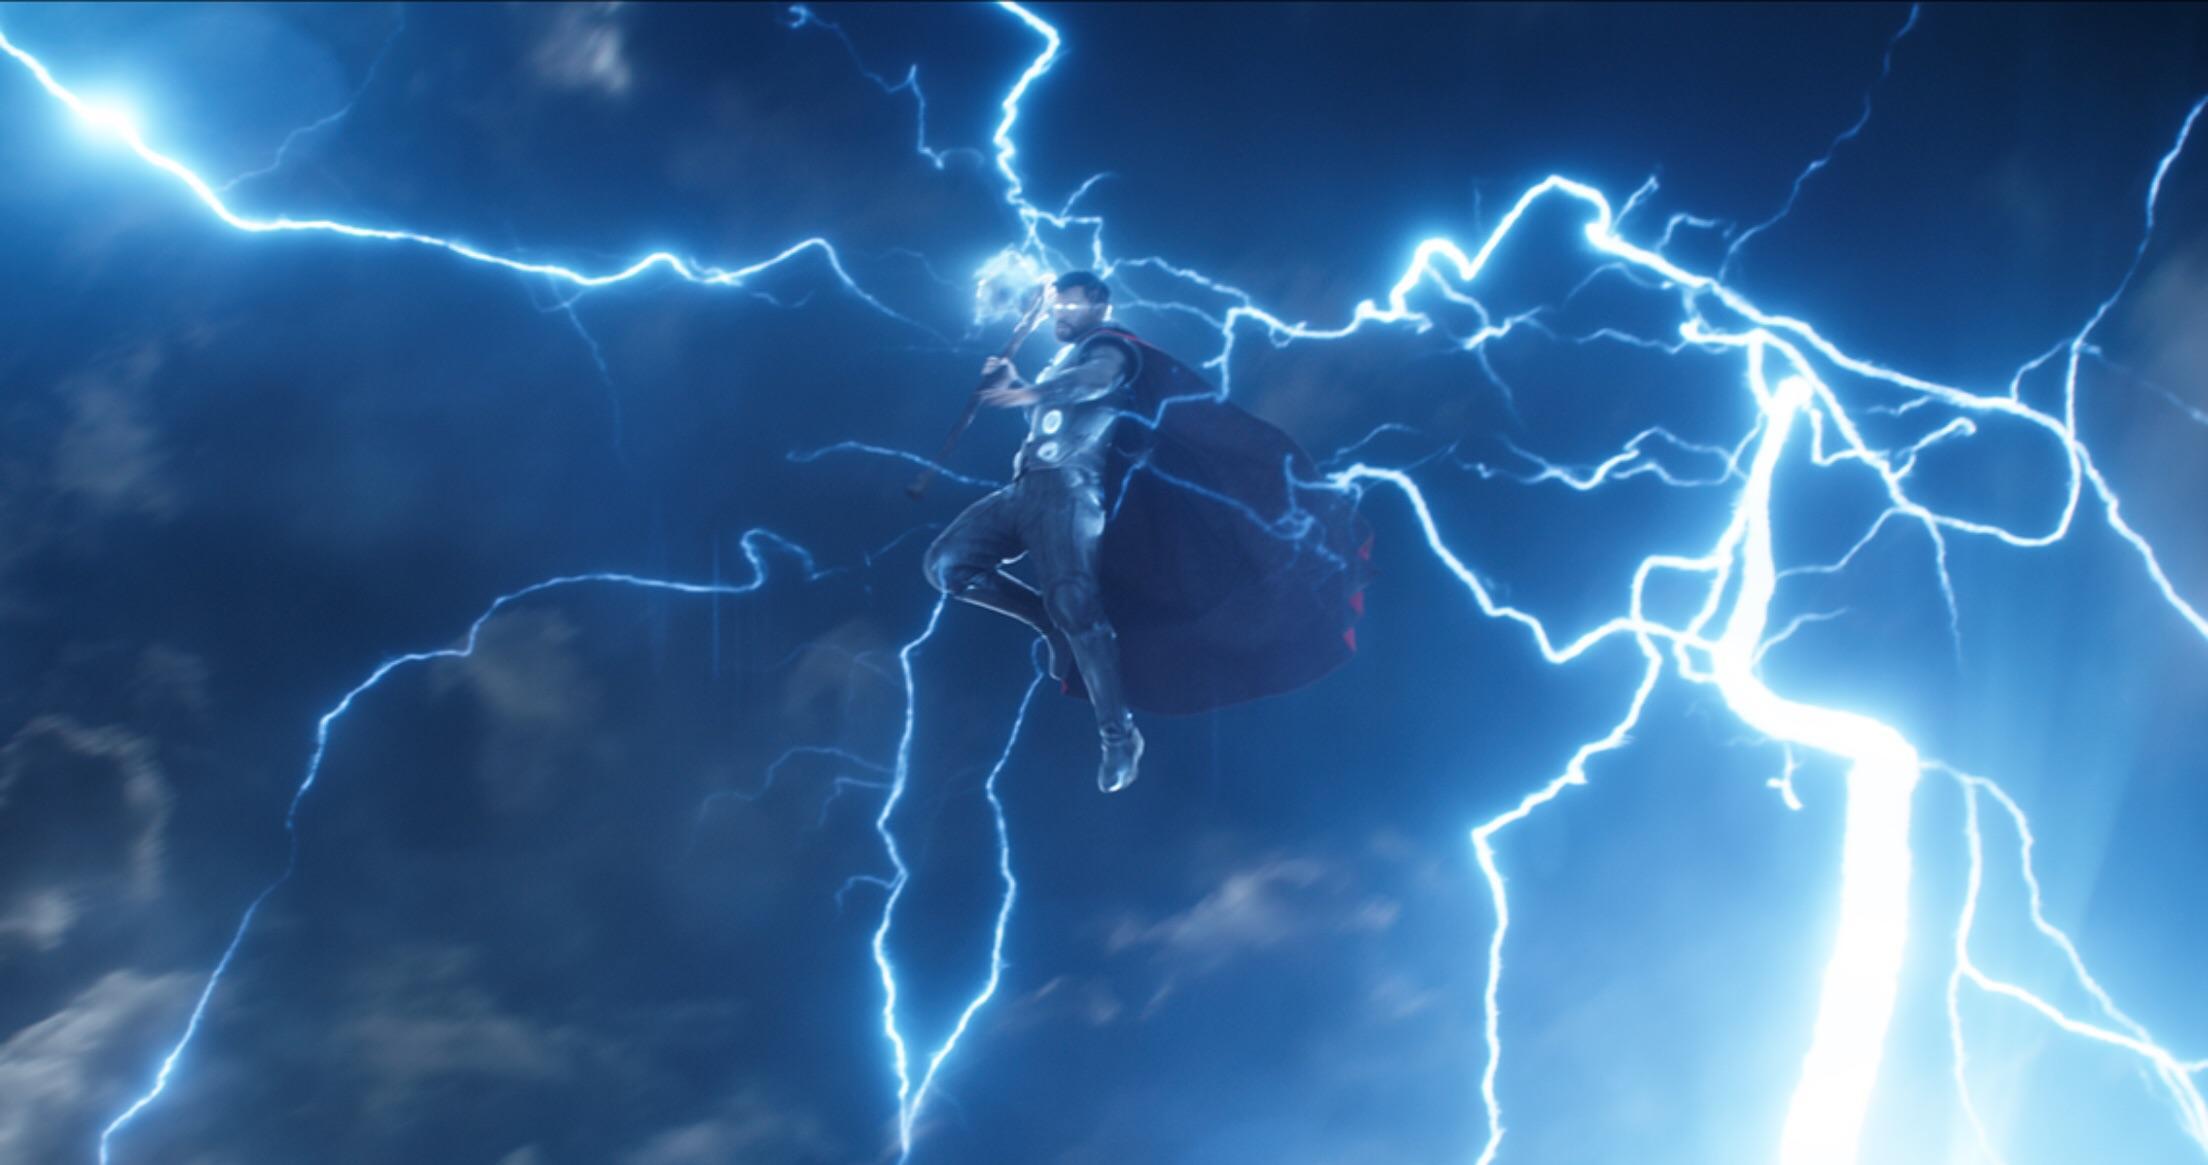 Thor with axe and glowing eyes Wallpaper 4k Ultra HD ID10098